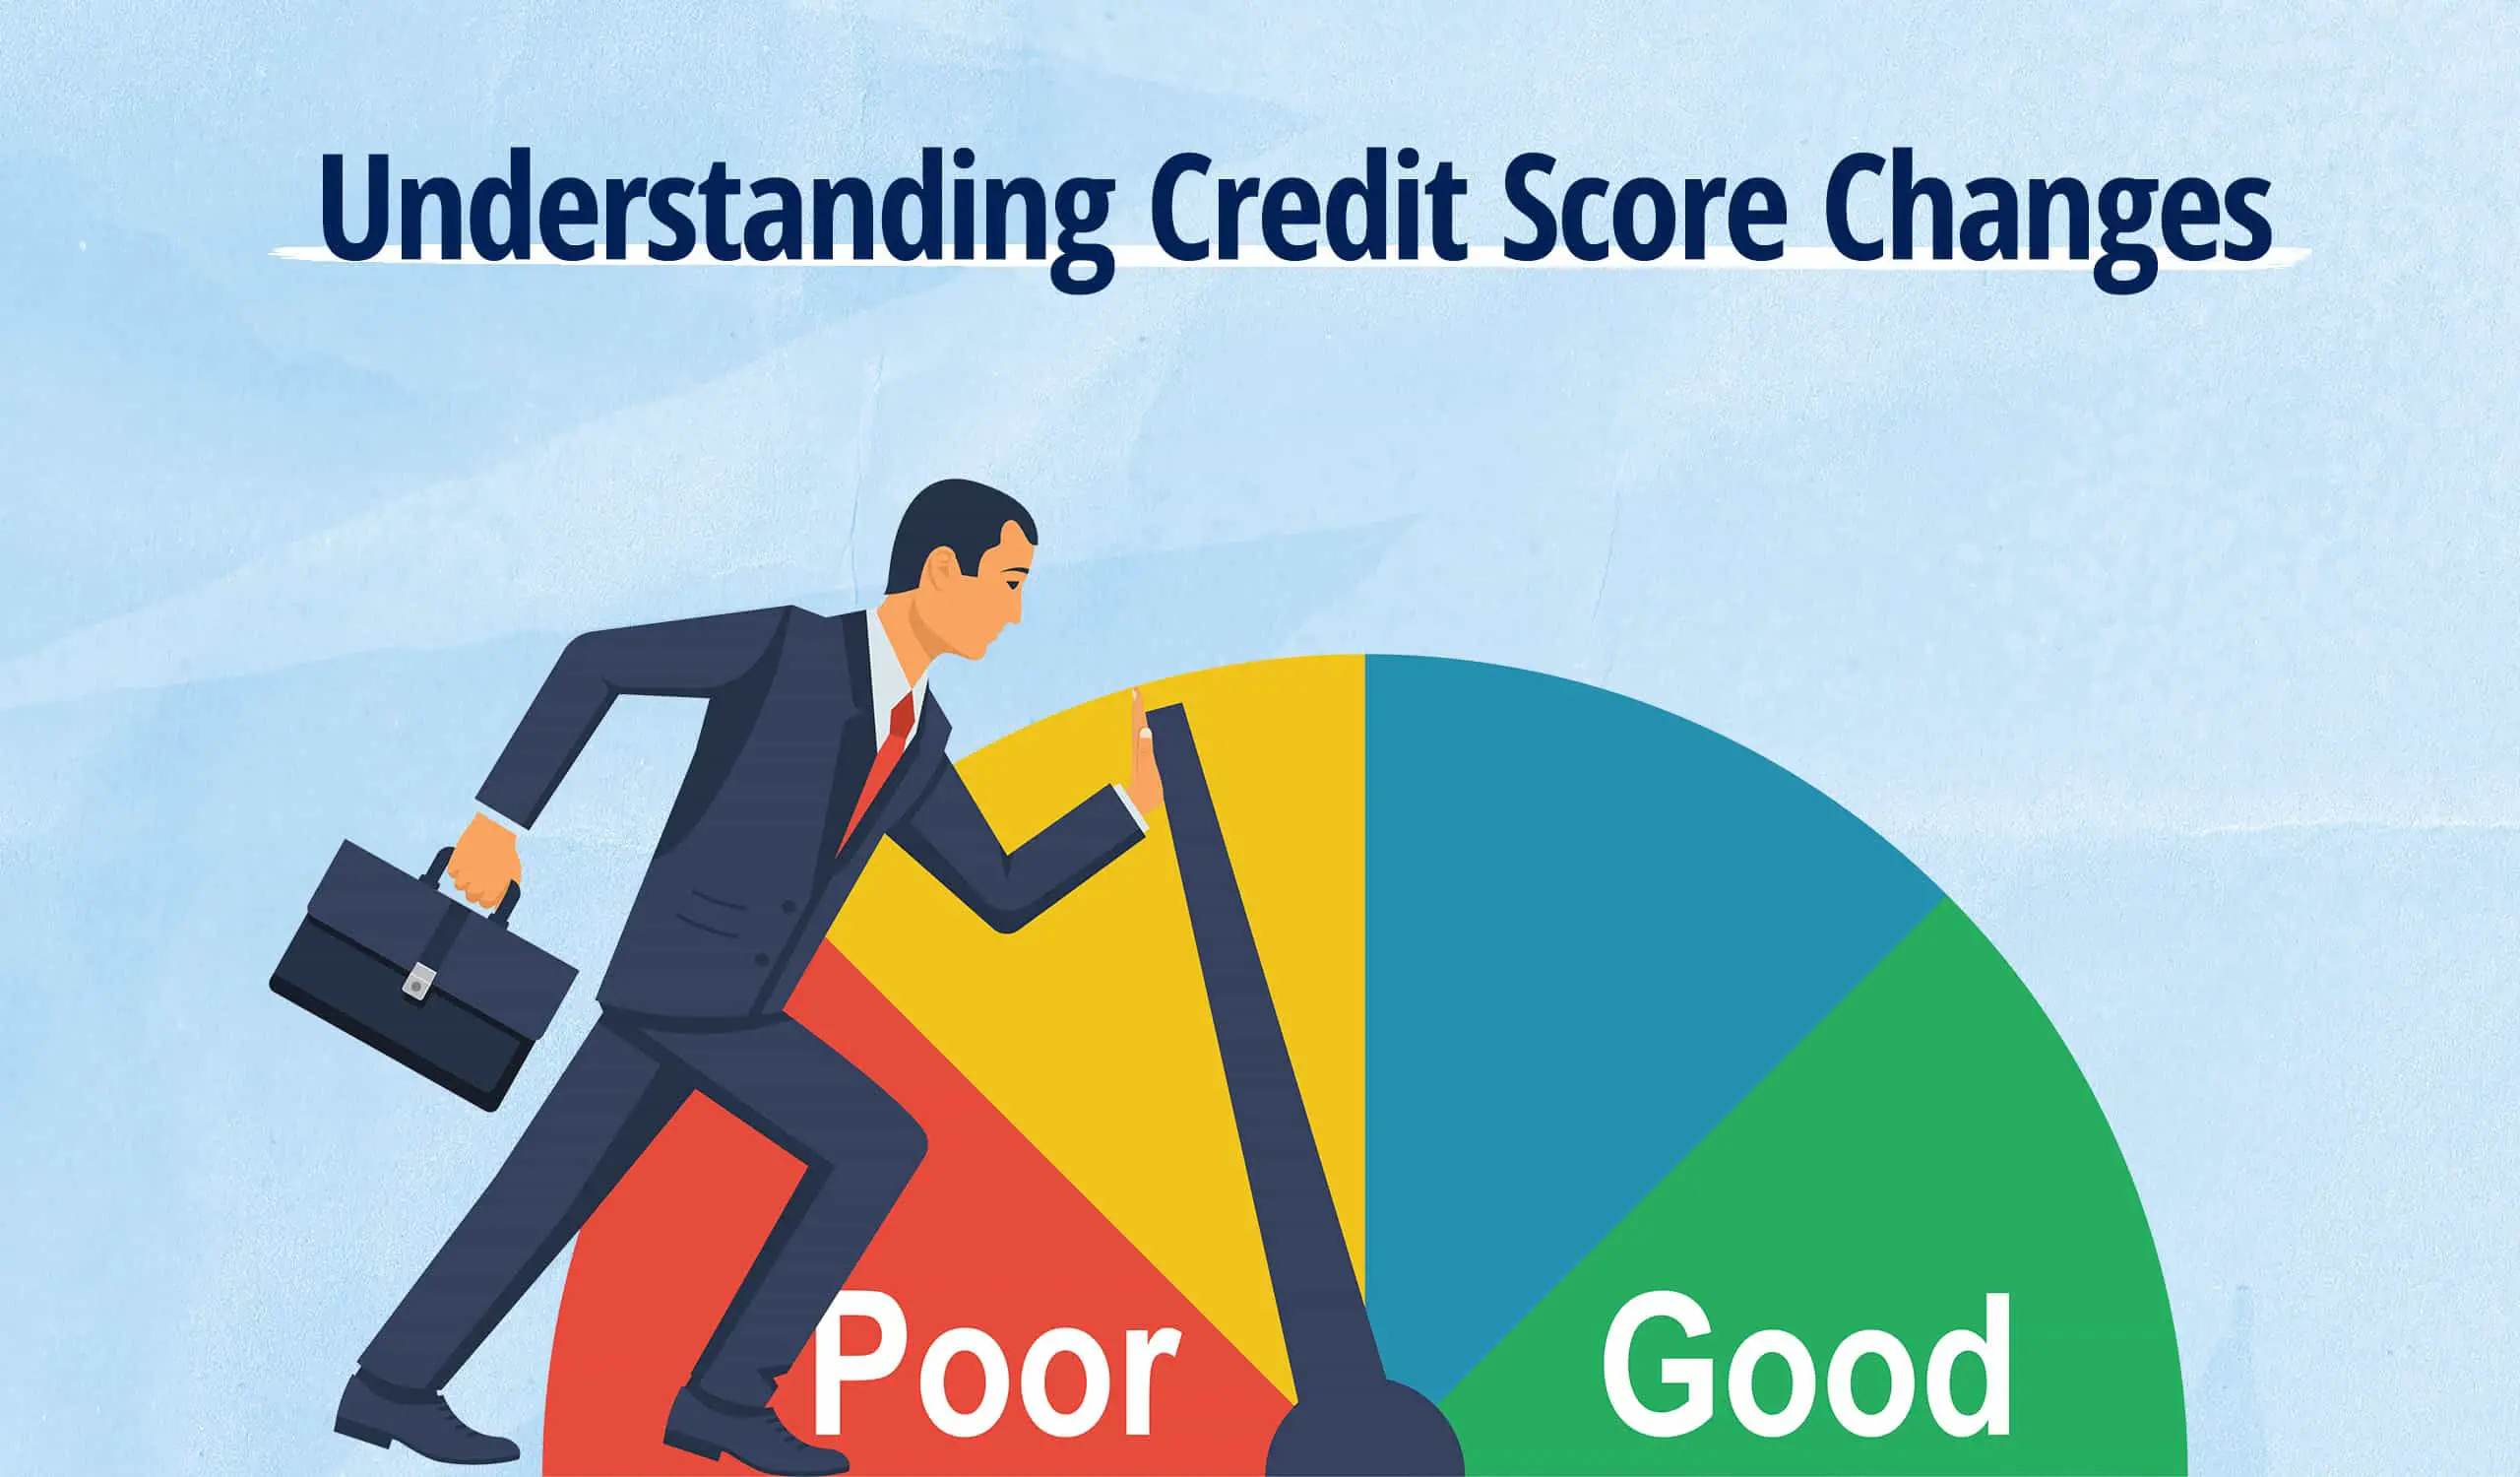 How Often Does Your Credit Score Change?